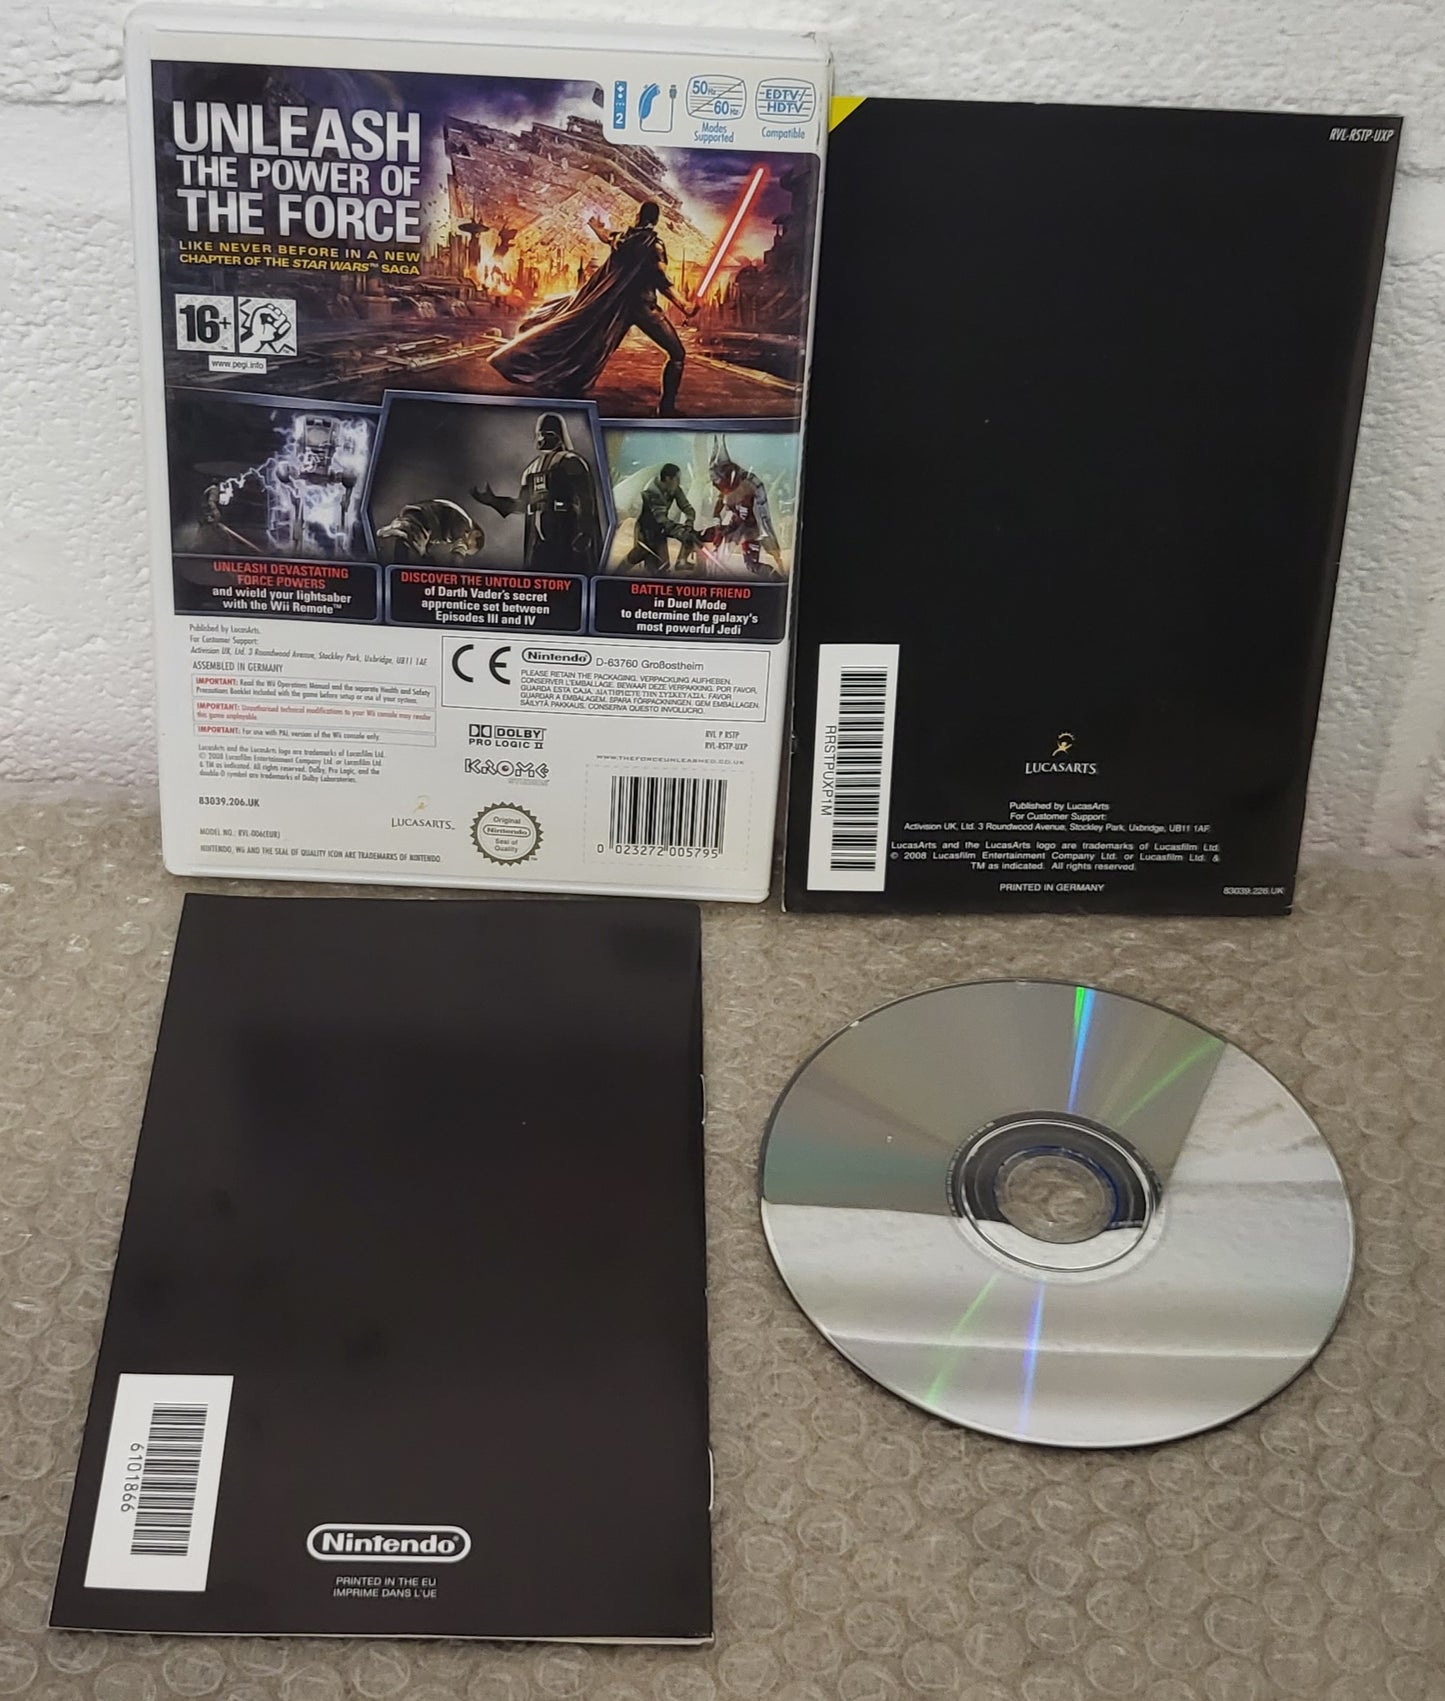 Star Wars The Force Unleashed Nintendo Wii game